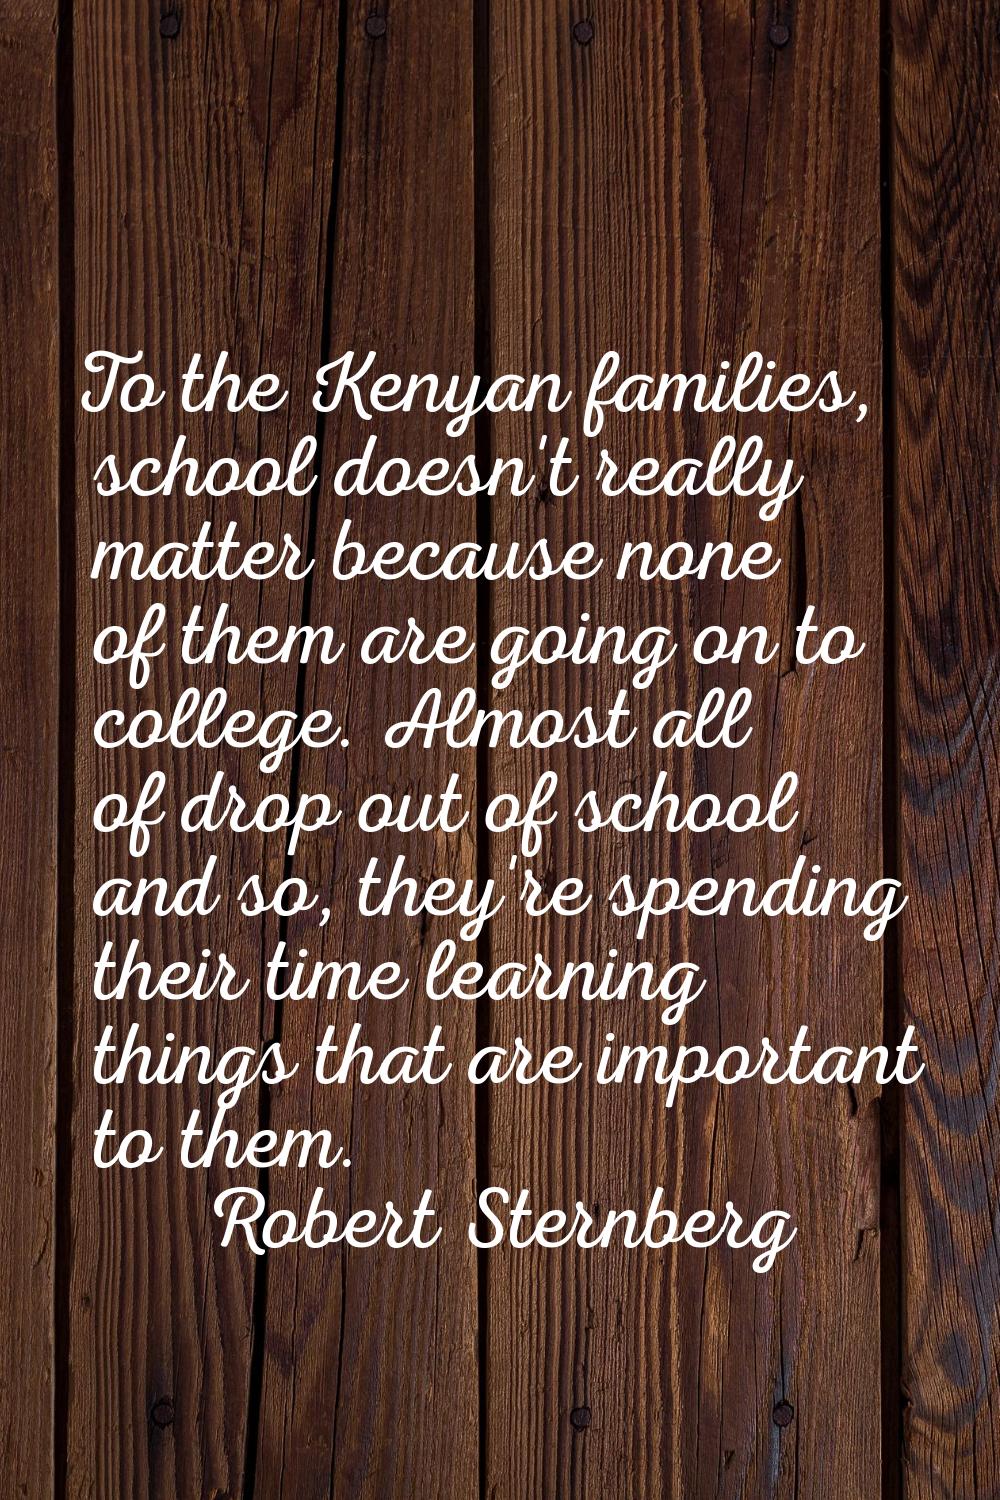 To the Kenyan families, school doesn't really matter because none of them are going on to college. 